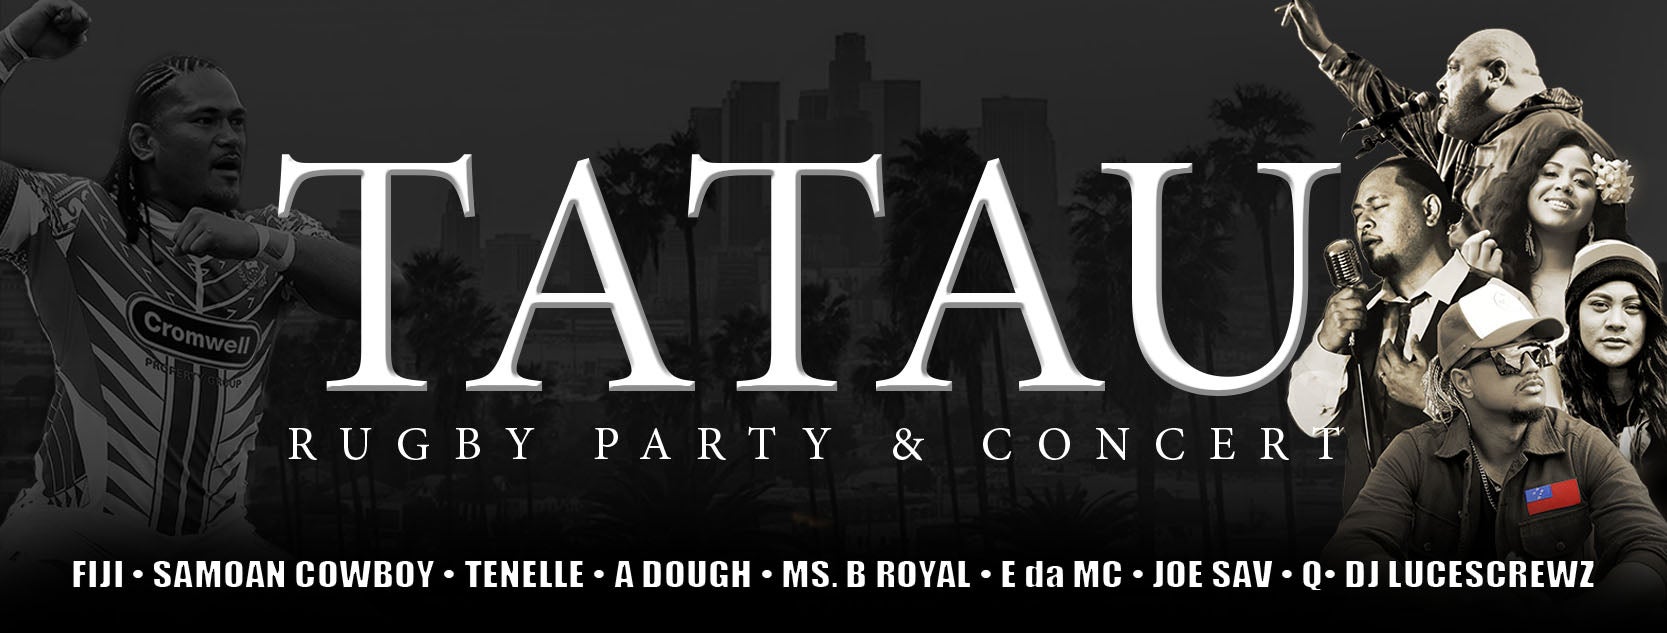 Tatau Rugby Party & Concert